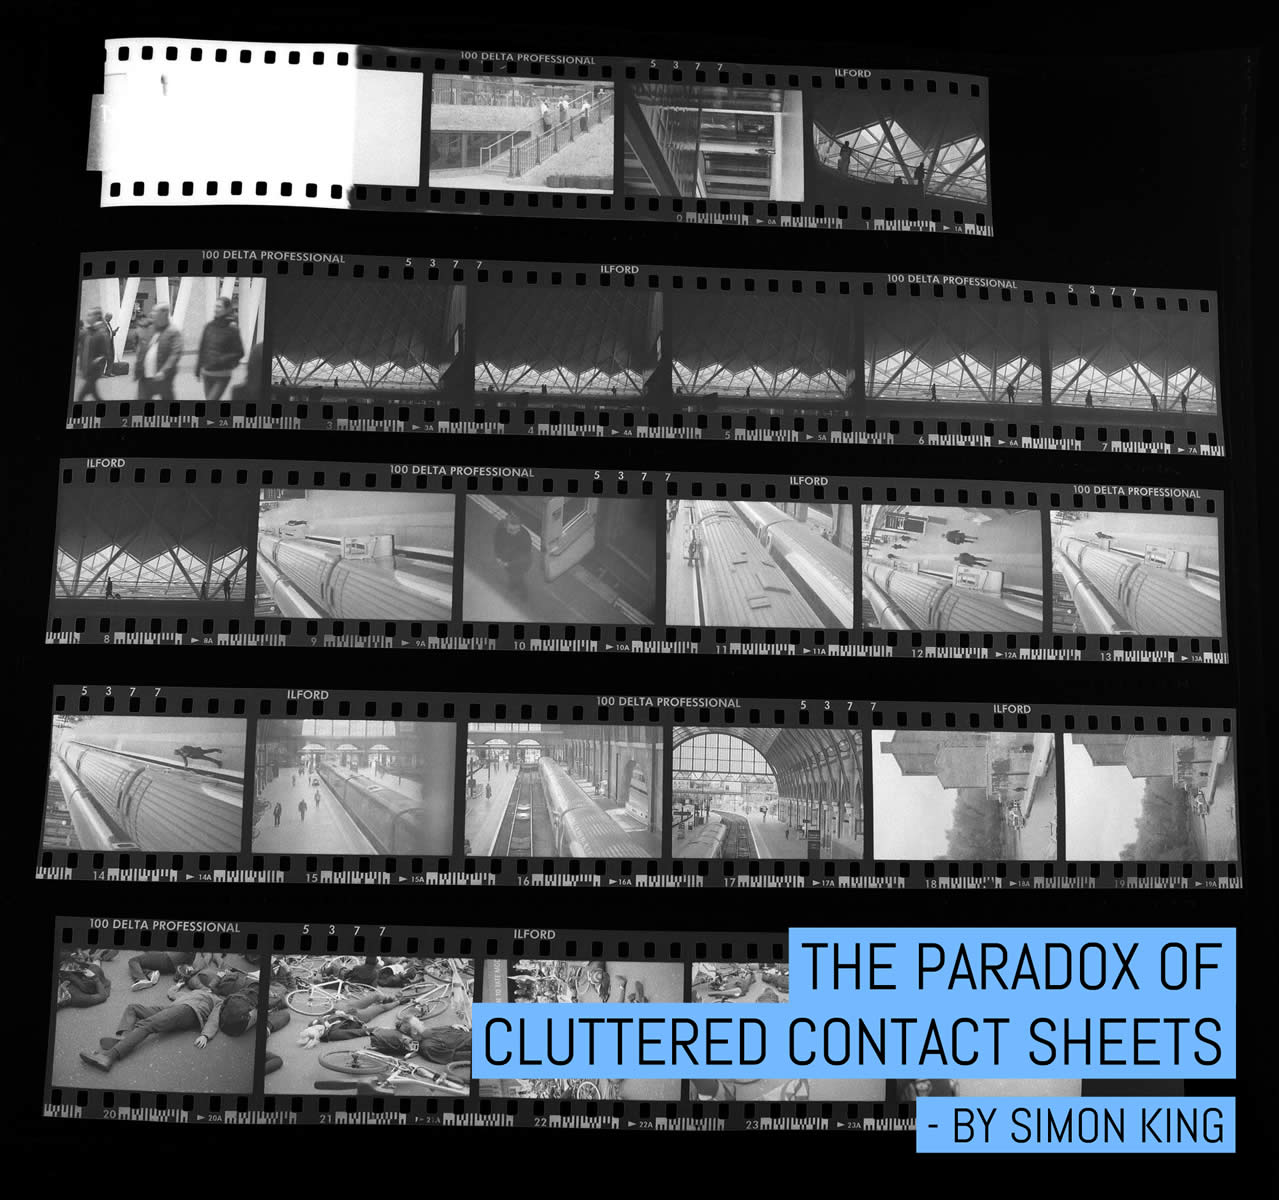 The Paradox of cluttered contact sheets